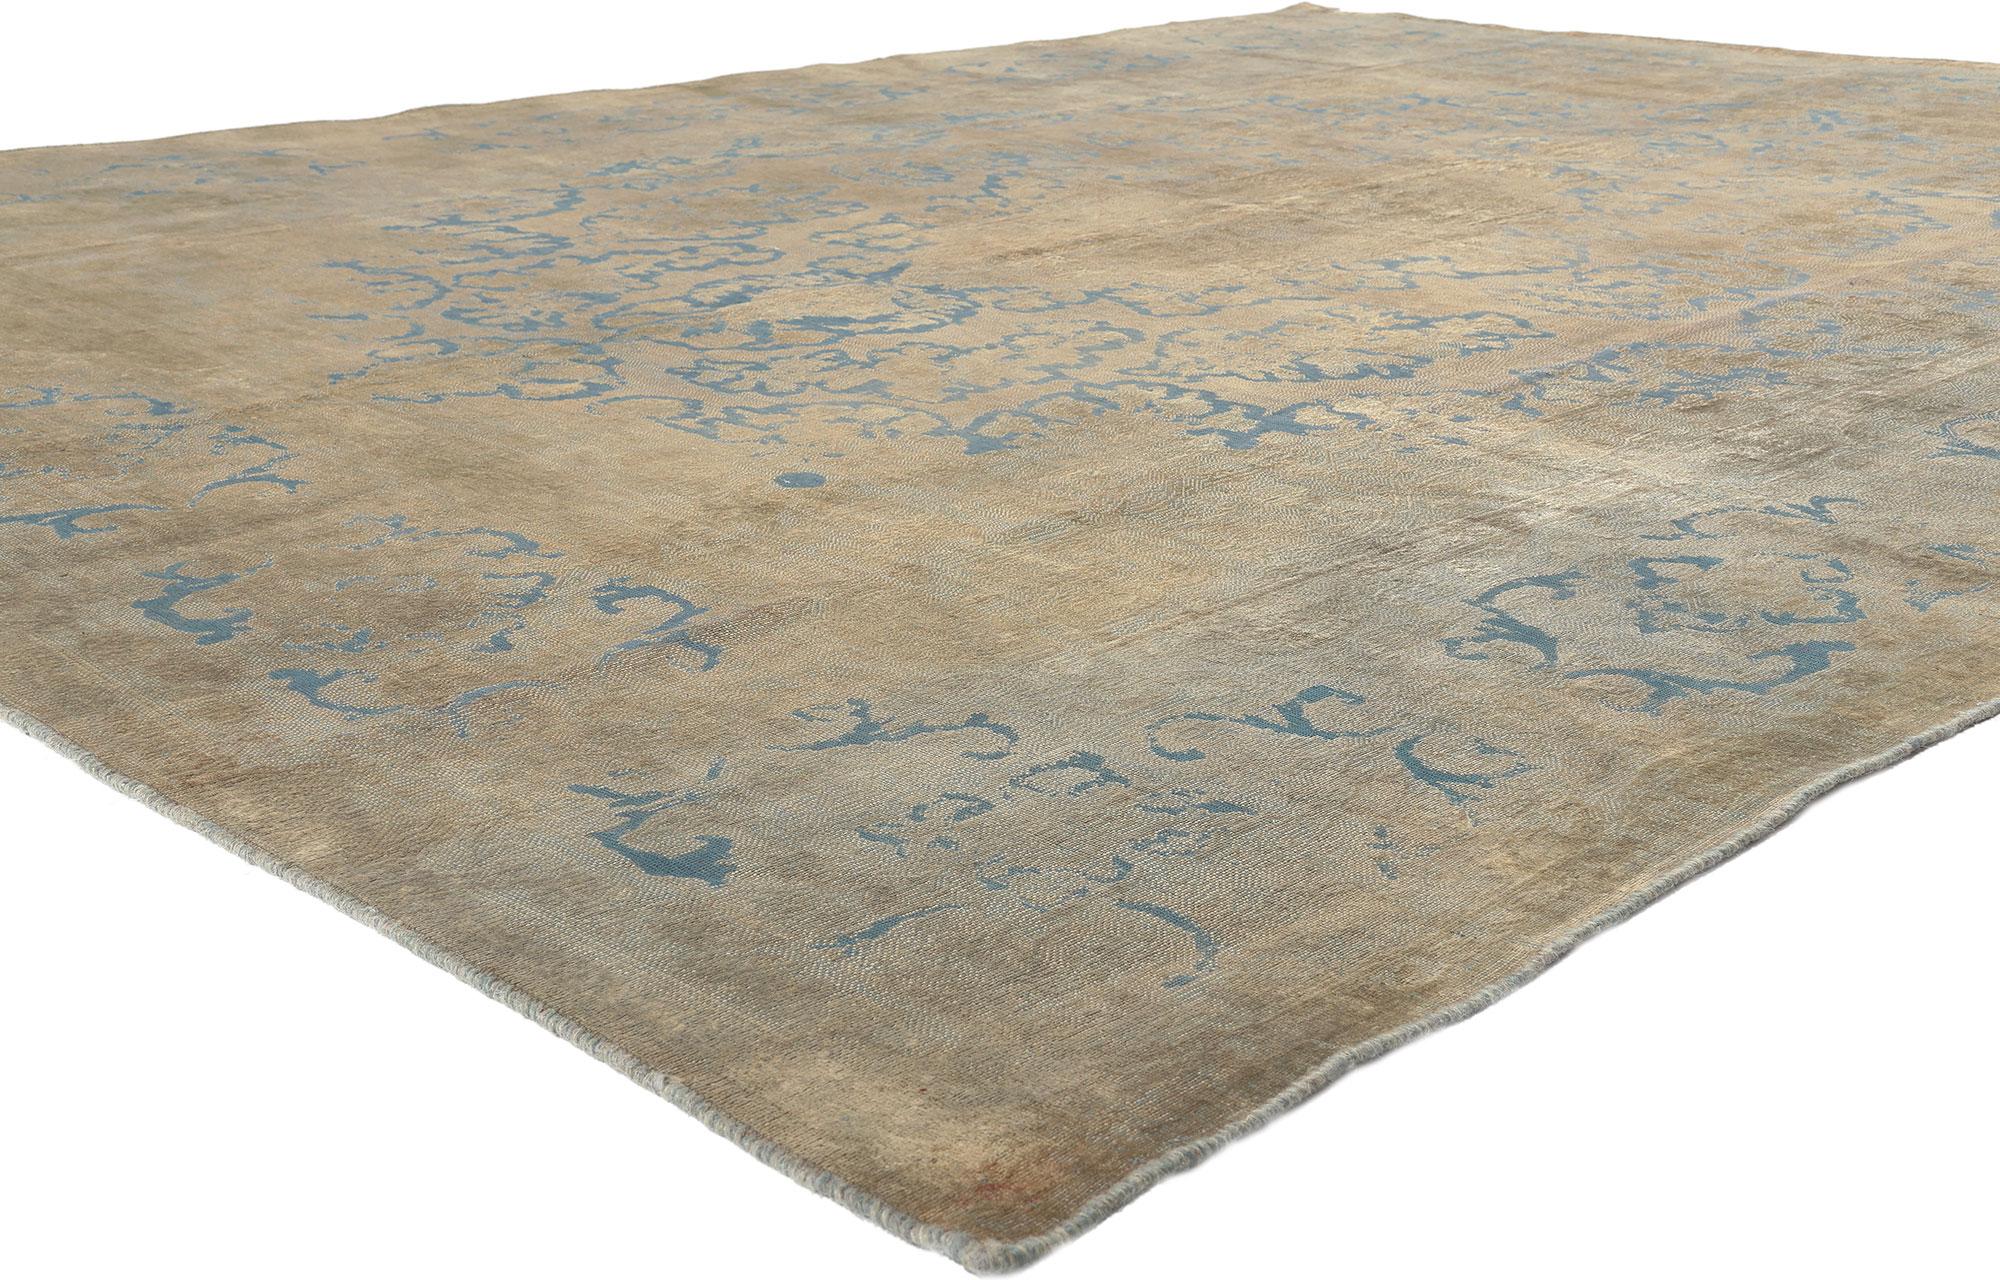 60620 Vintage Turkish Overdyed Rug, 09'07 x 12'06. 
Crafted with meticulous attention to detail, this hand knotted wool vintage Turkish overdyed rug seamlessly integrates a stylish aesthetic with subtle French Country influences, coupled with